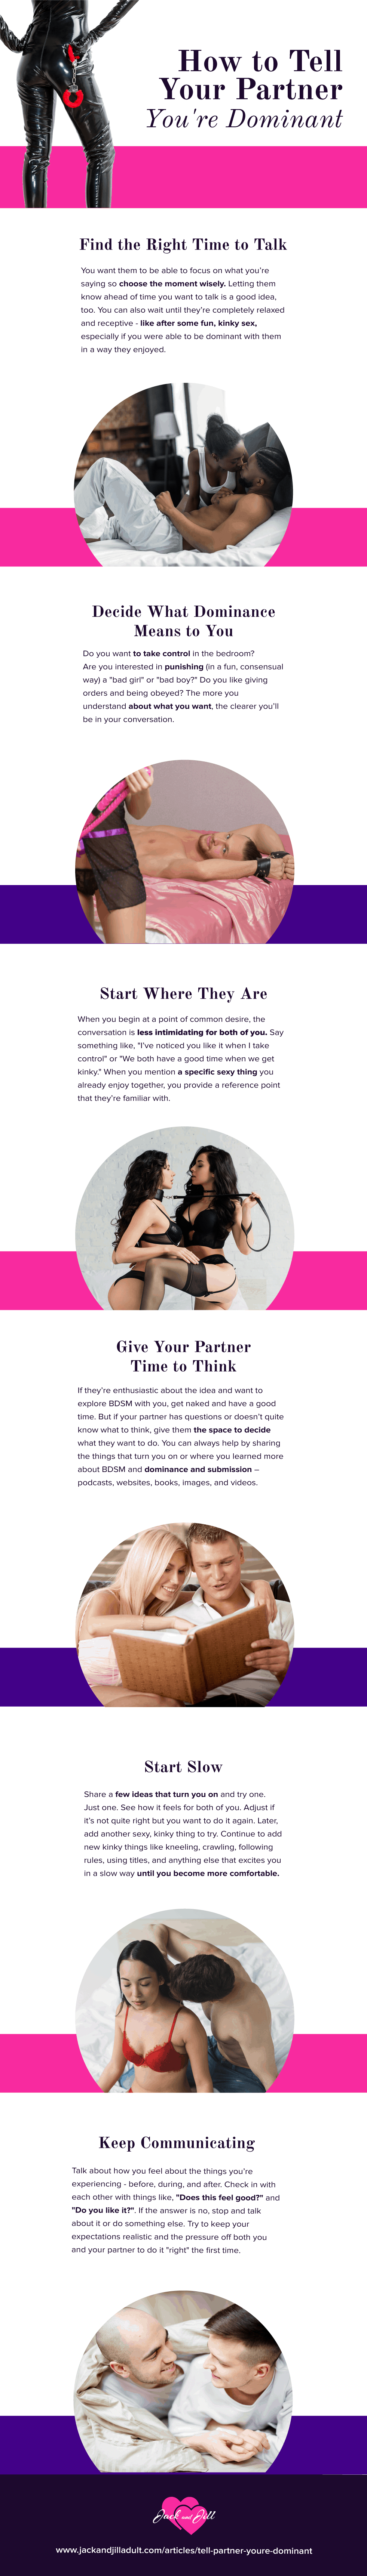 Infographic for How to Tell Your Partner You’re a Dominant